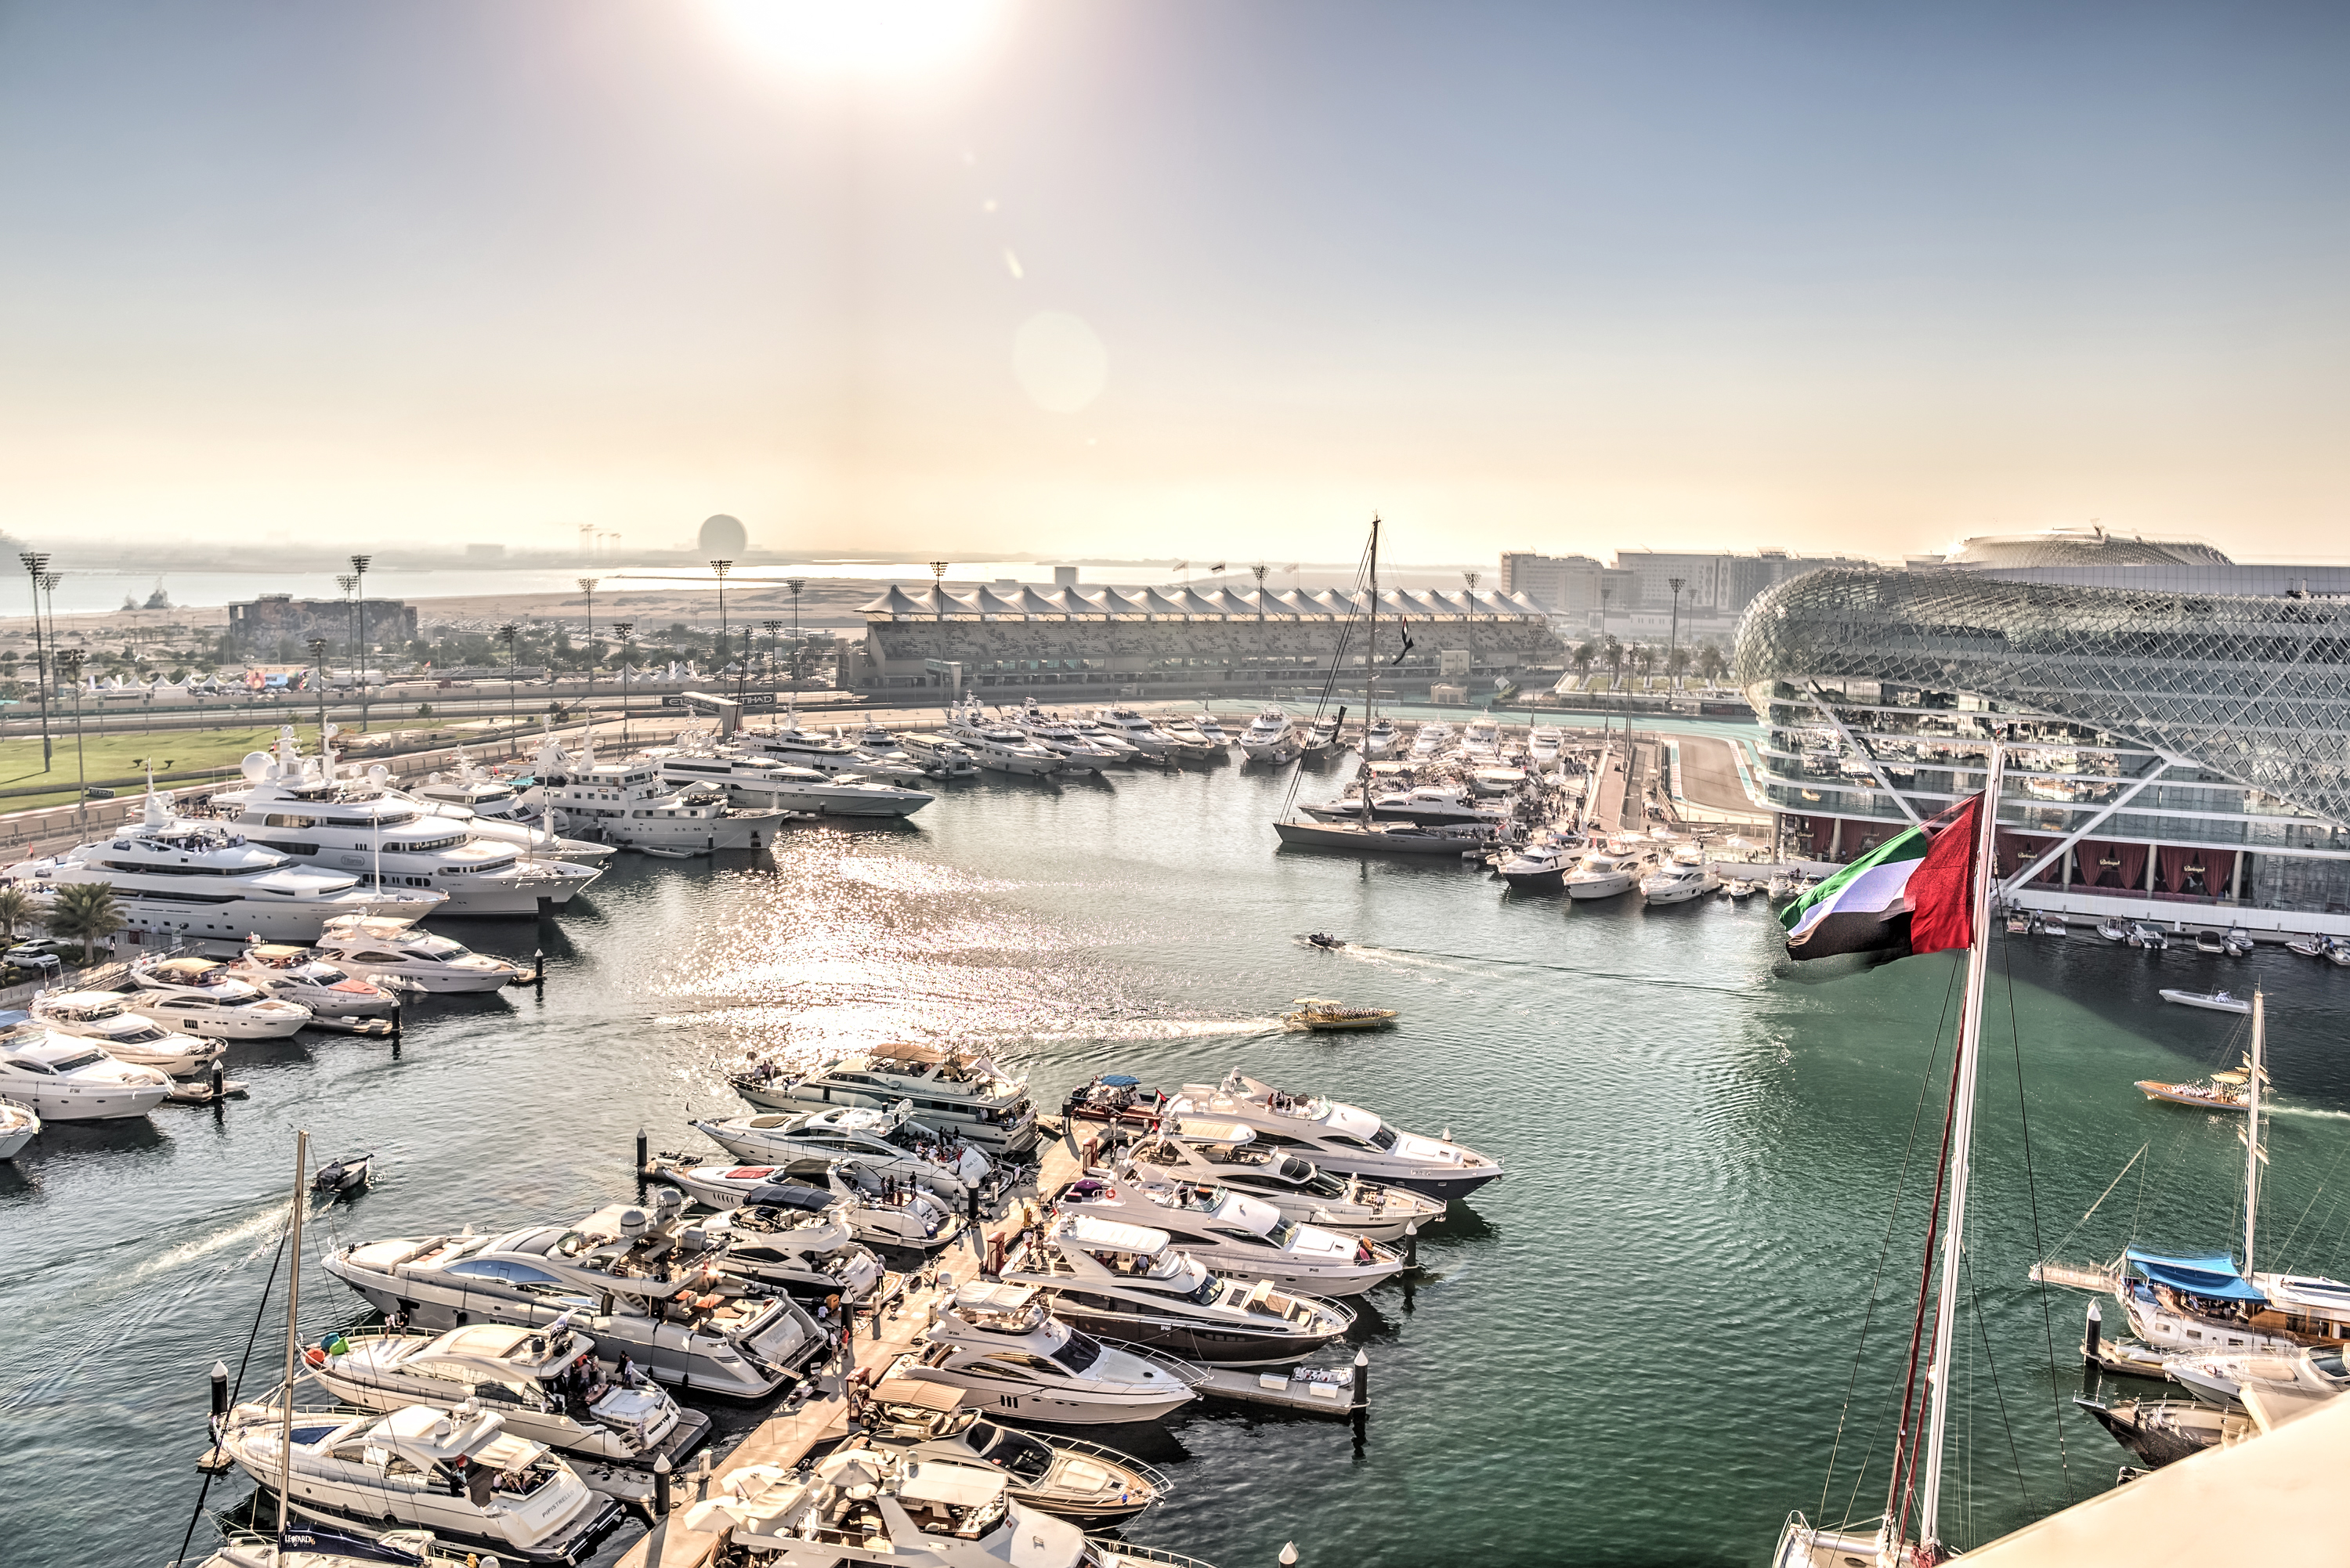 Yas Marina Gears Up For Unforgettable Entertainment During The Formula 1™ Etihad Airways Abu Dhabi Grand Prix 2022